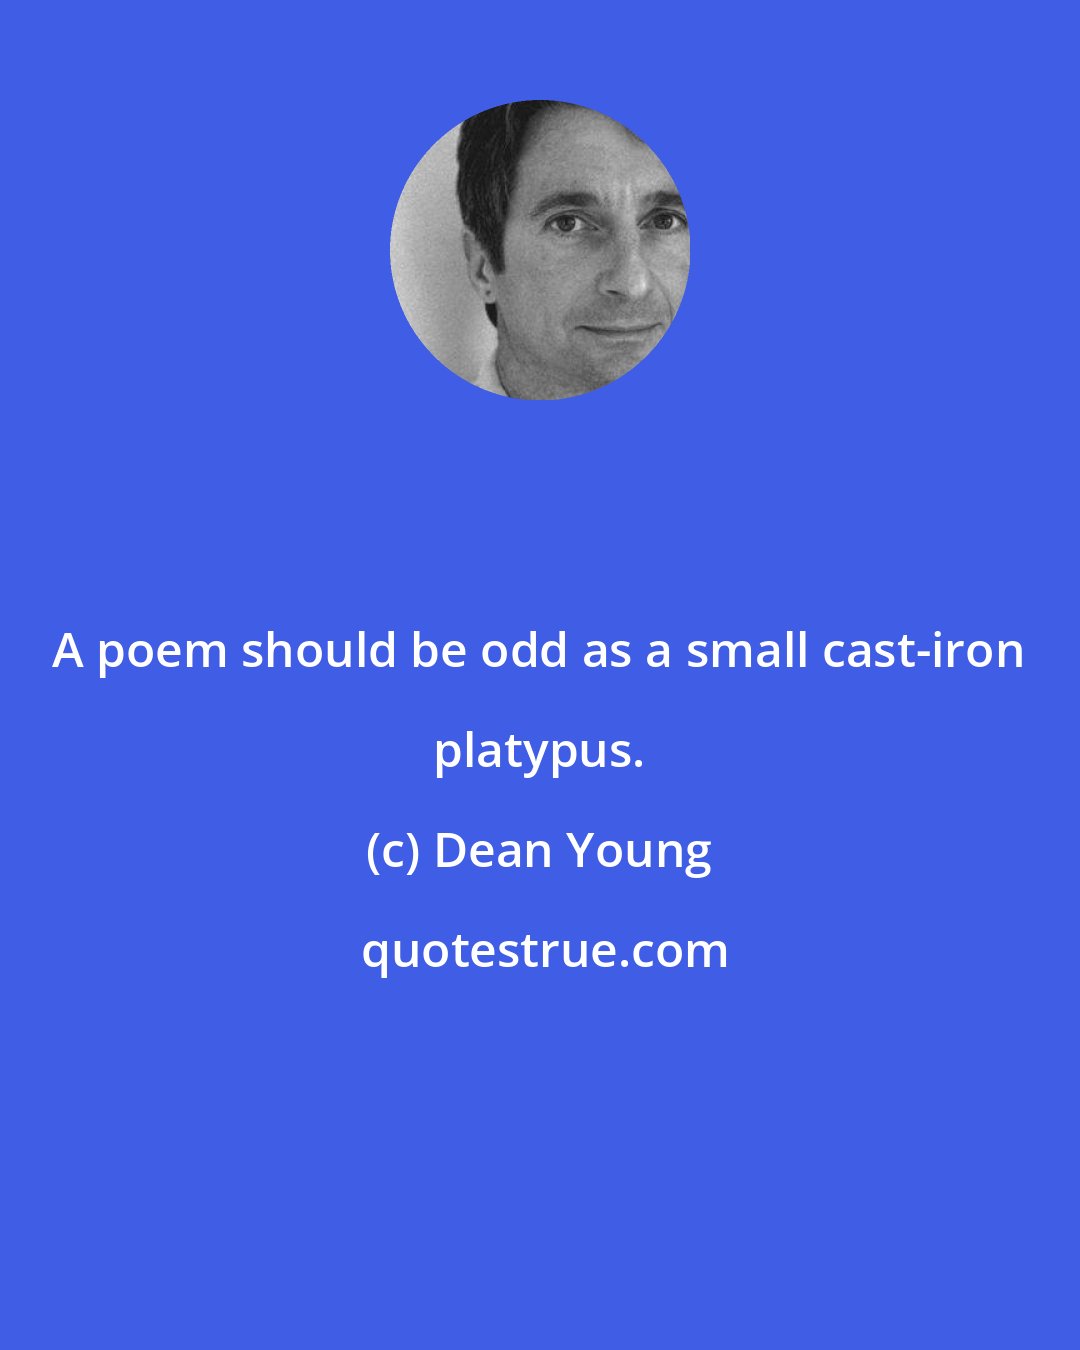 Dean Young: A poem should be odd as a small cast-iron platypus.